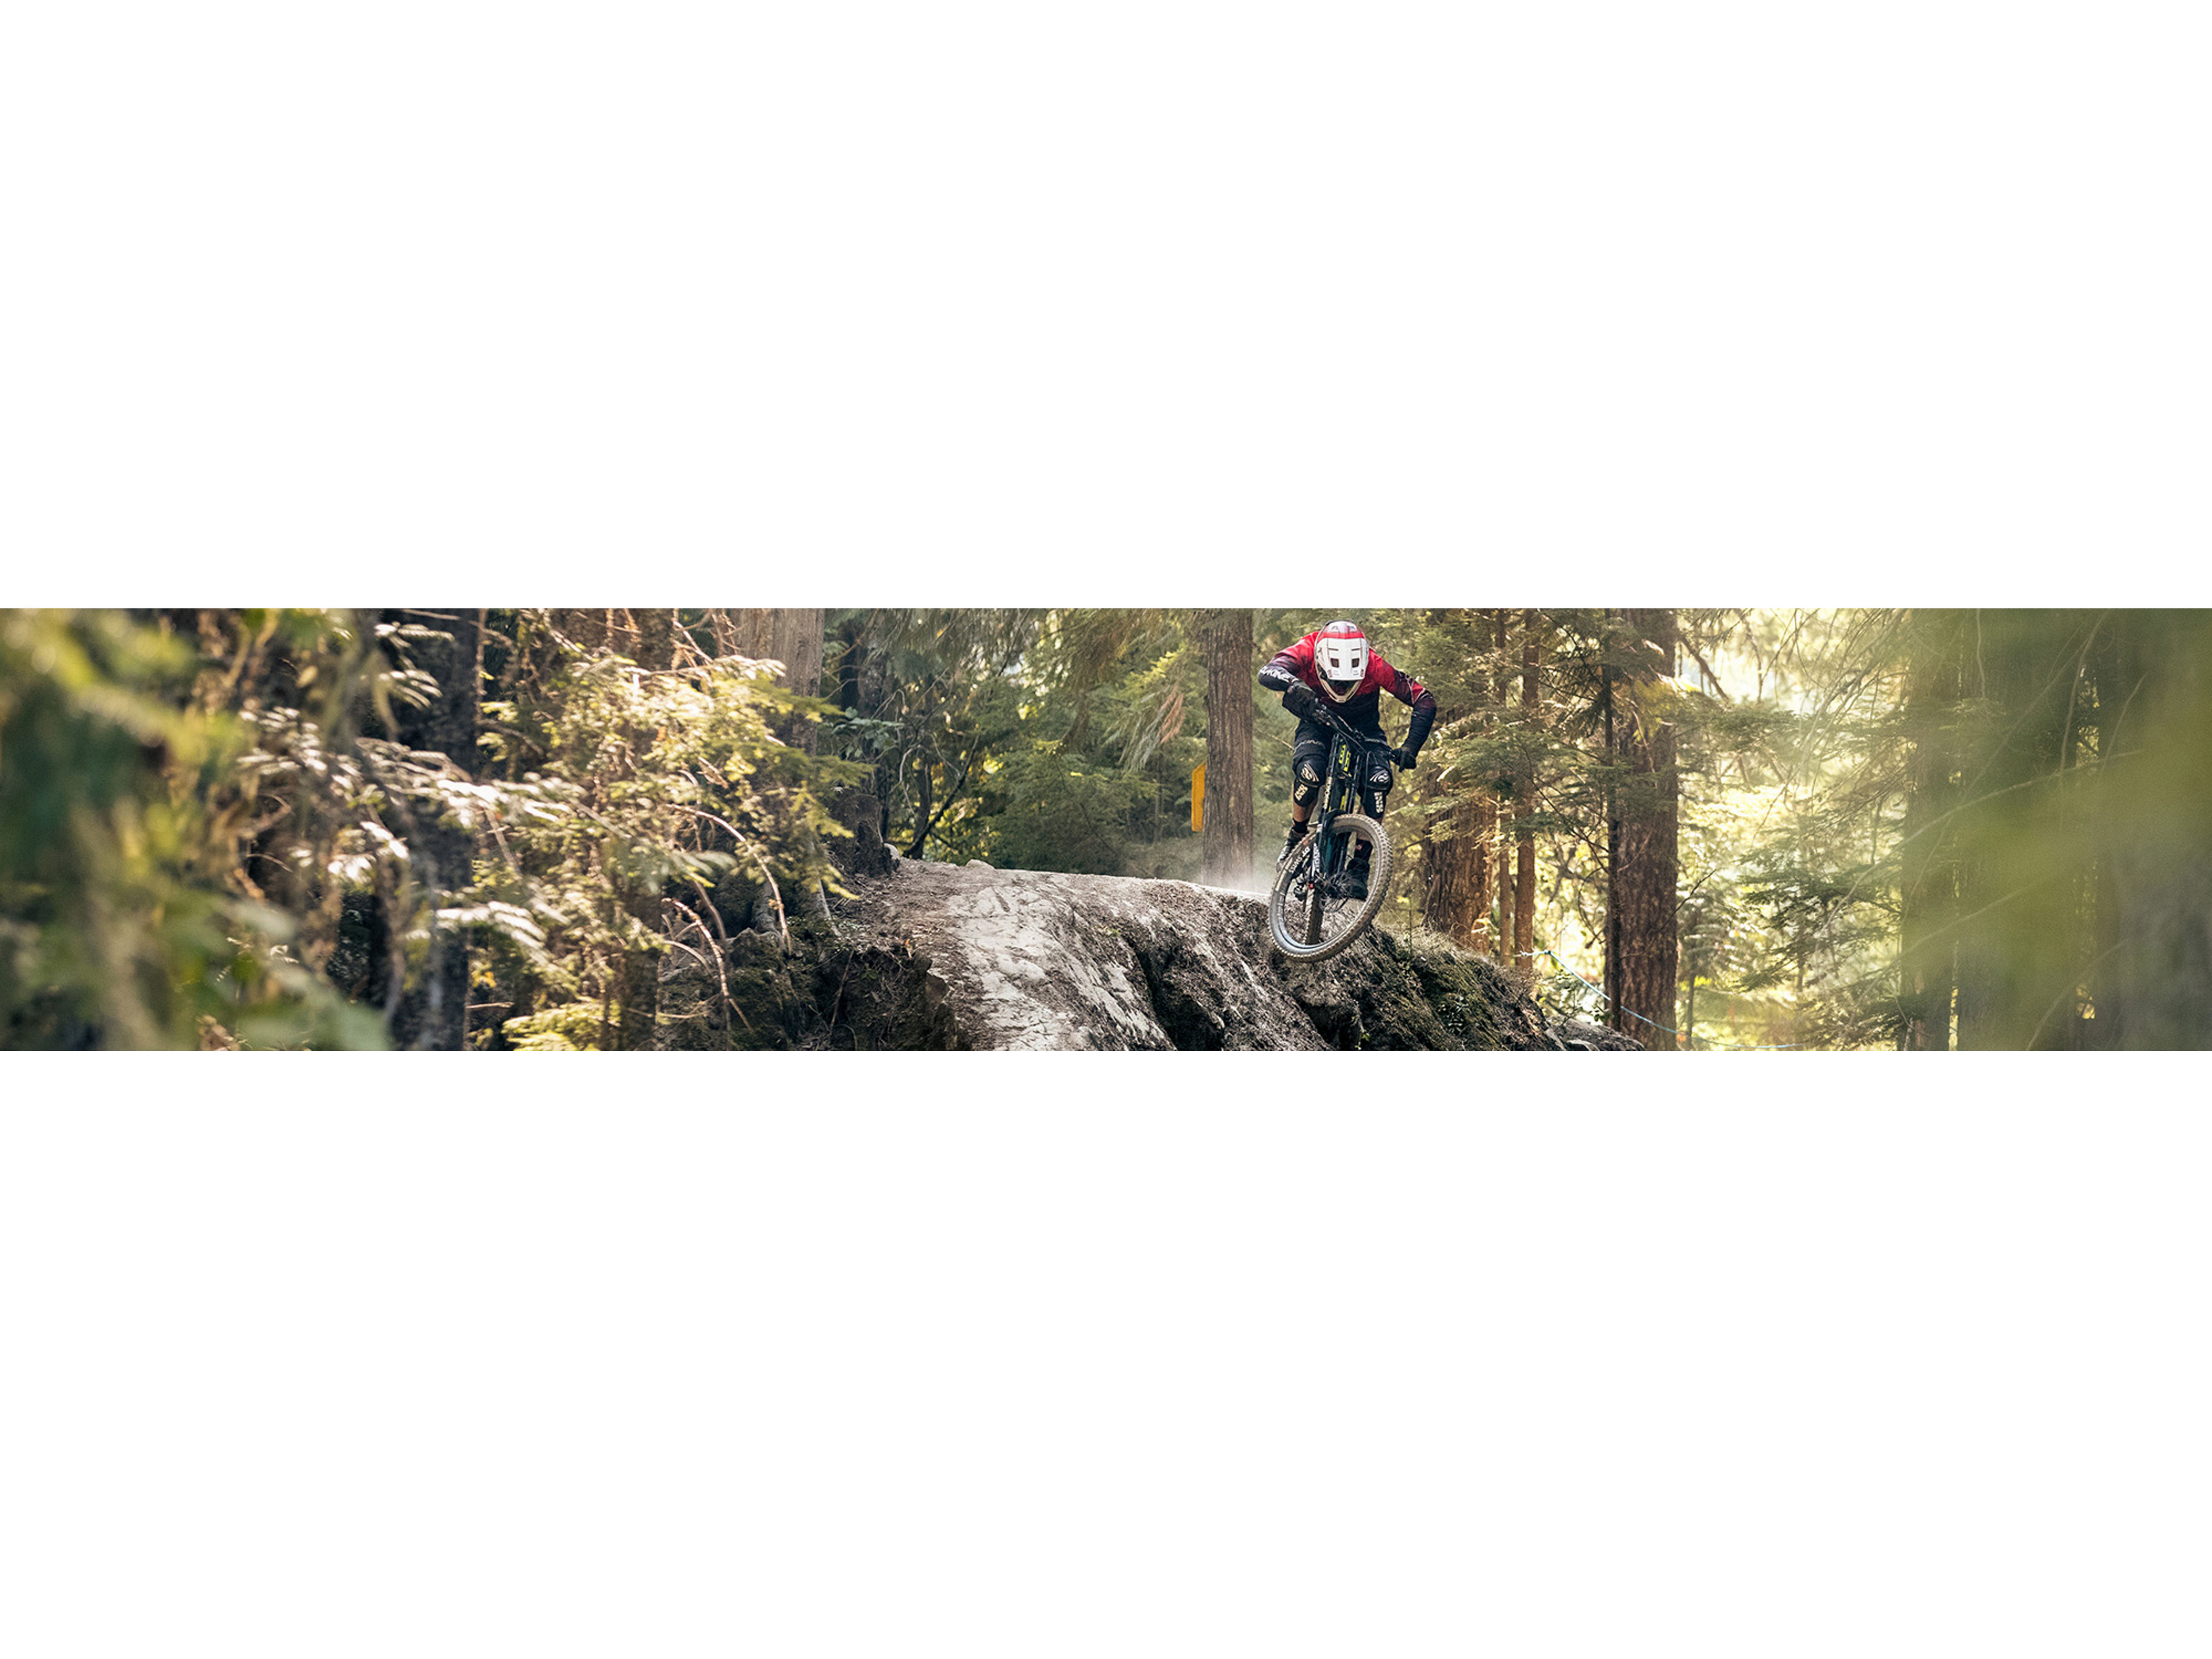 Essential Gear and Preparation for Whistler Mountain Biking